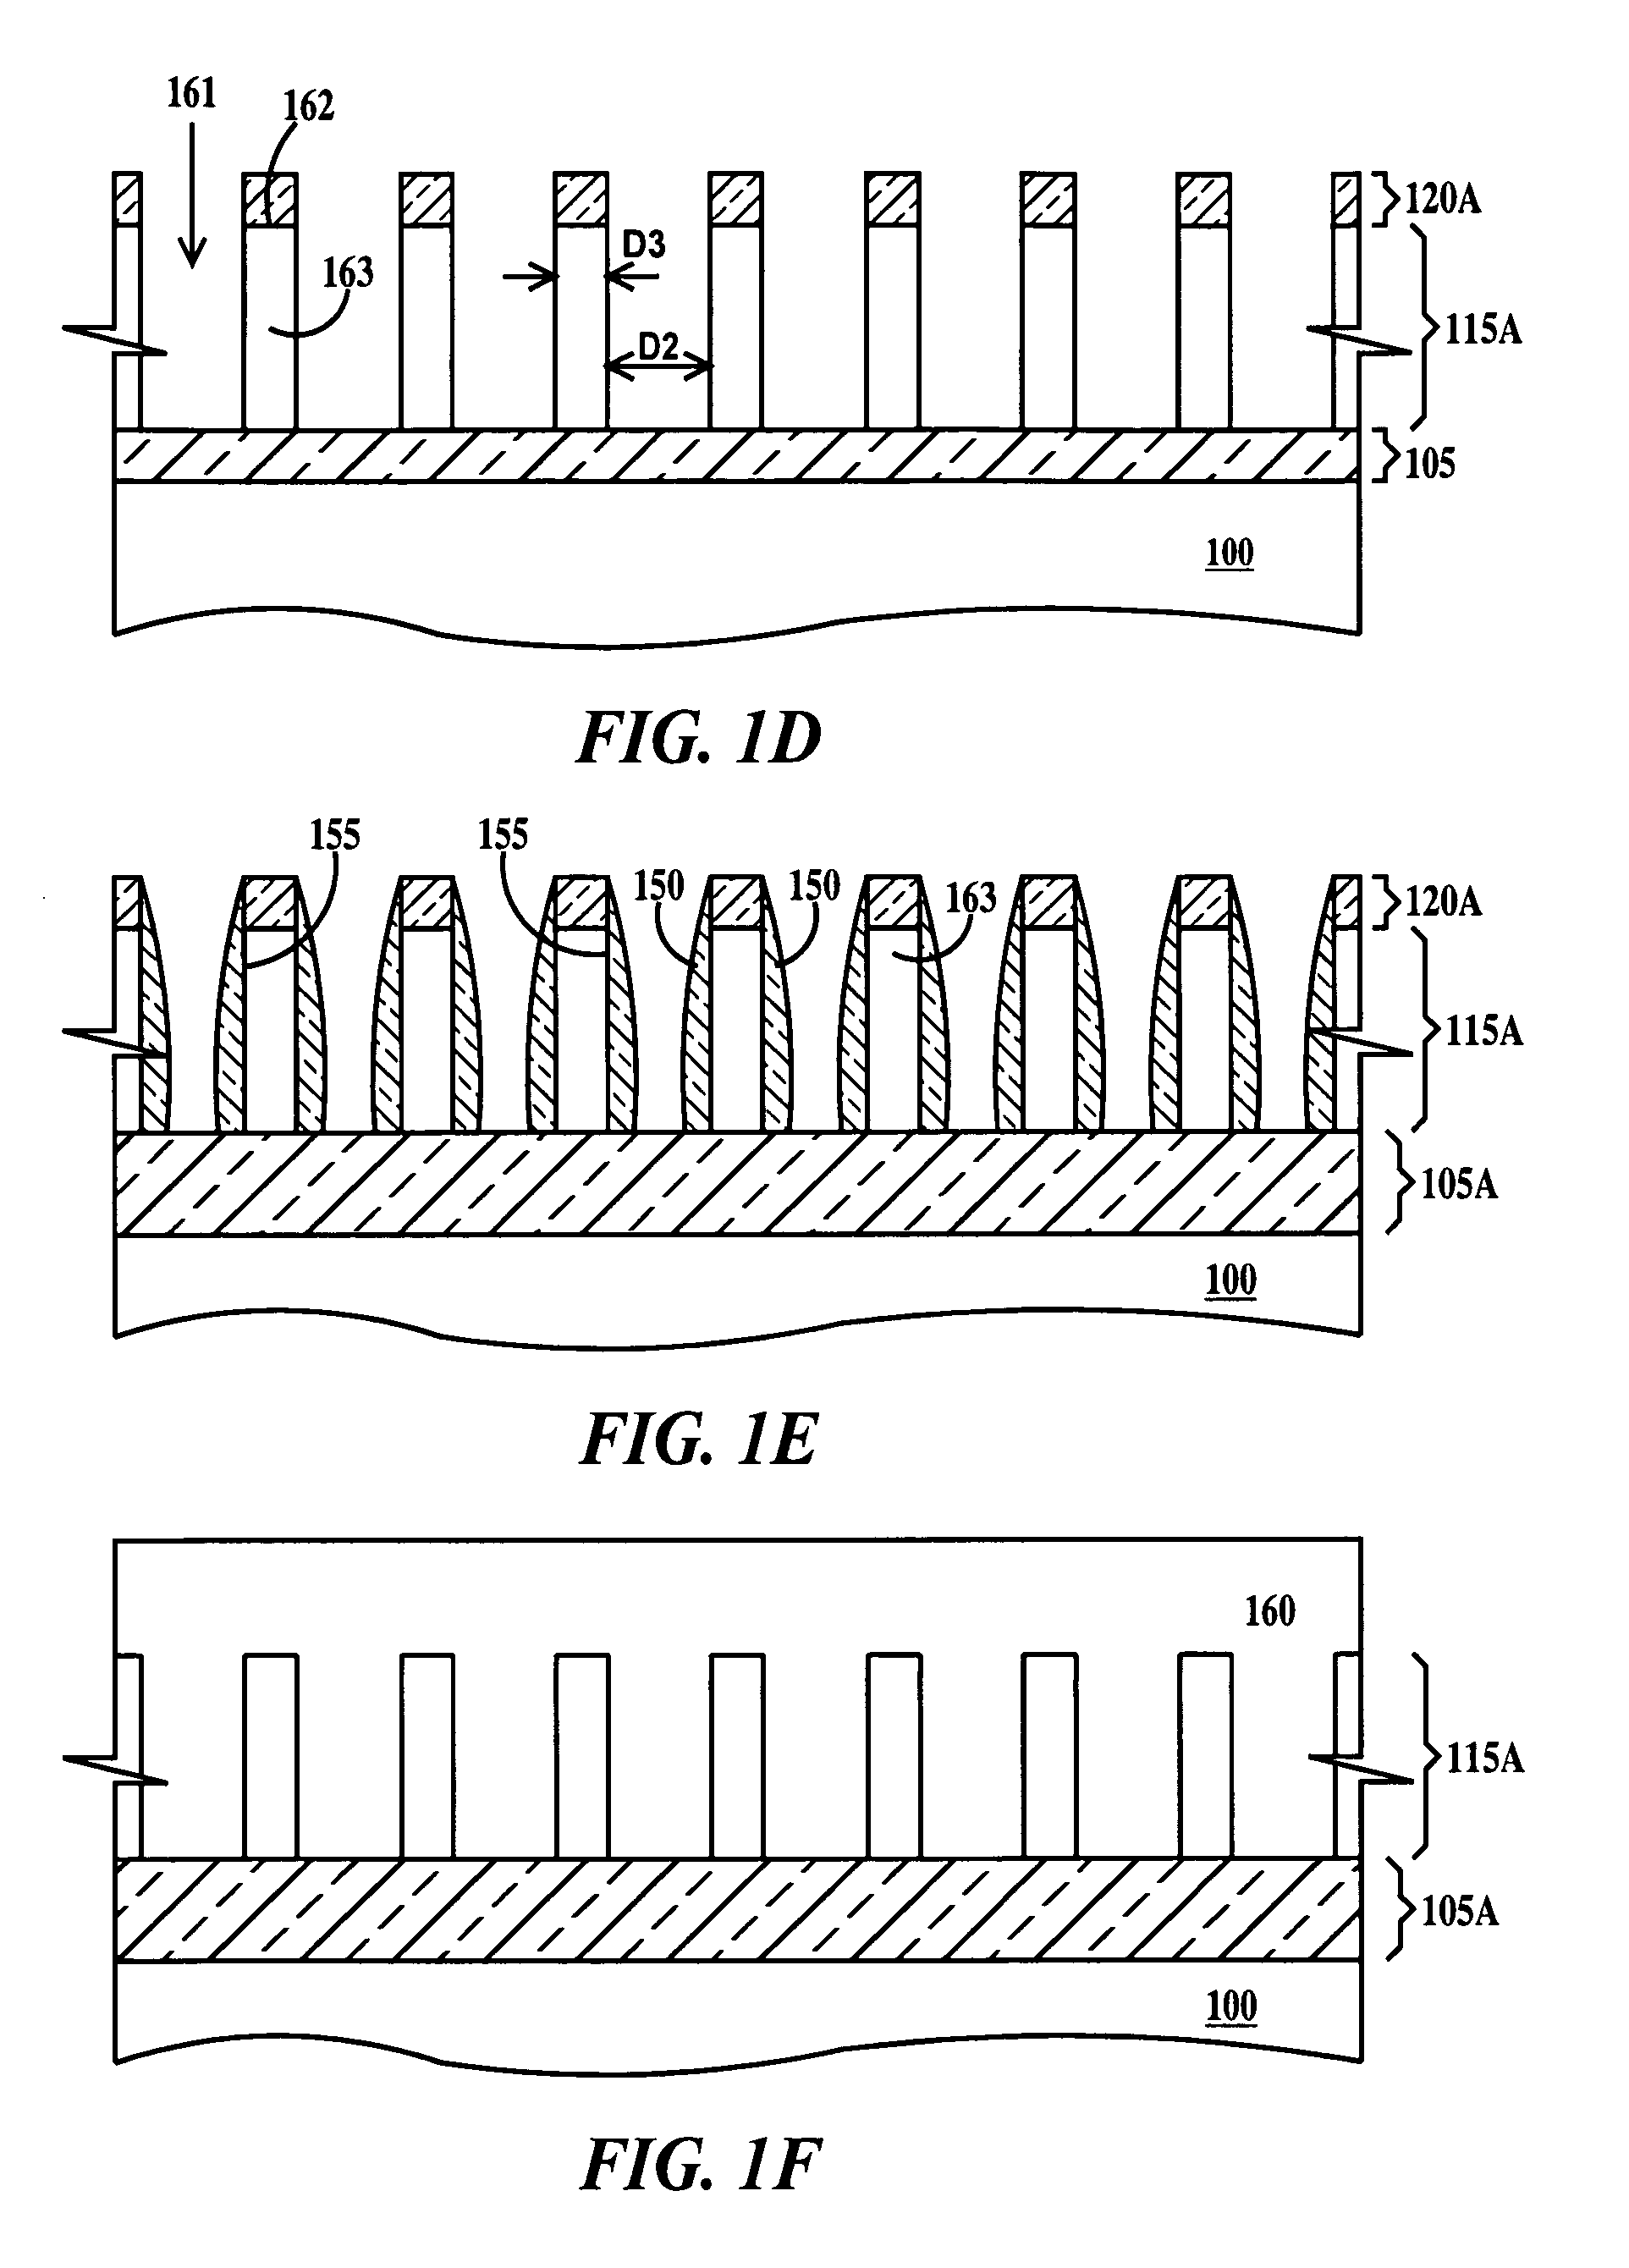 Method of forming buried isolation regions in semiconductor substrates and semiconductor devices with buried isolation regions